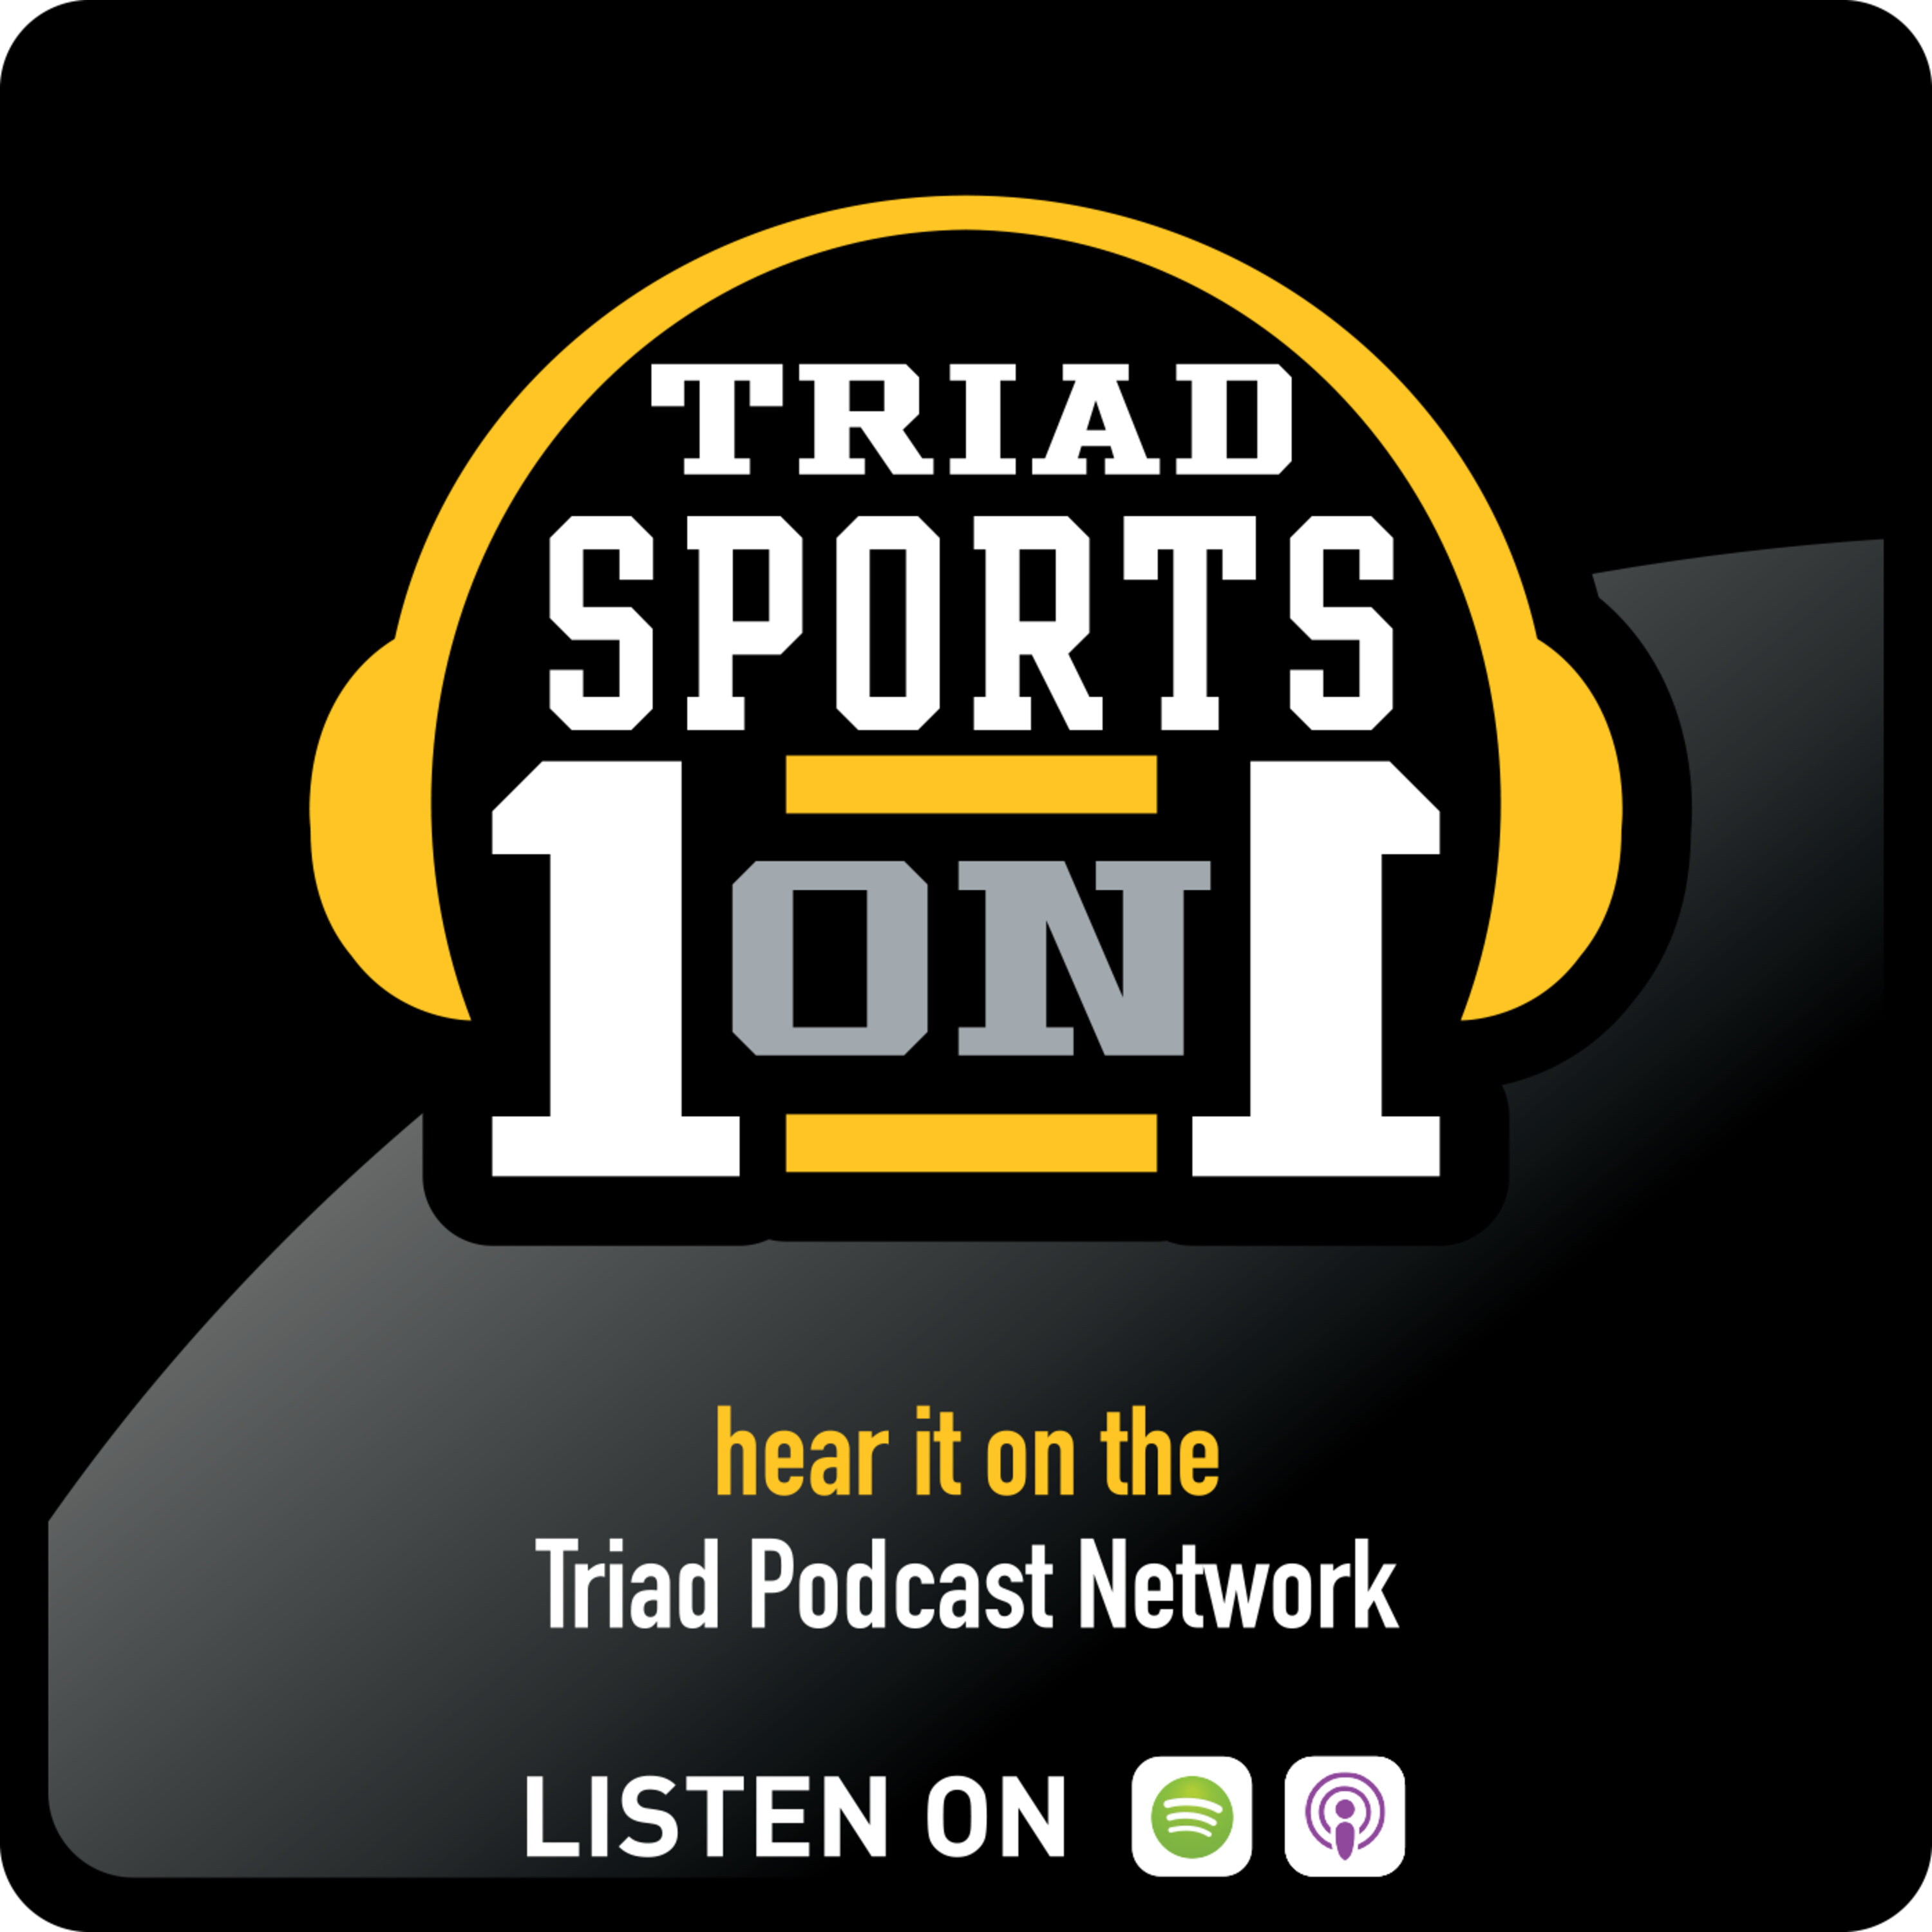 Triad Sports 1on1 - Stan Cotten,  Voice of the Deacs